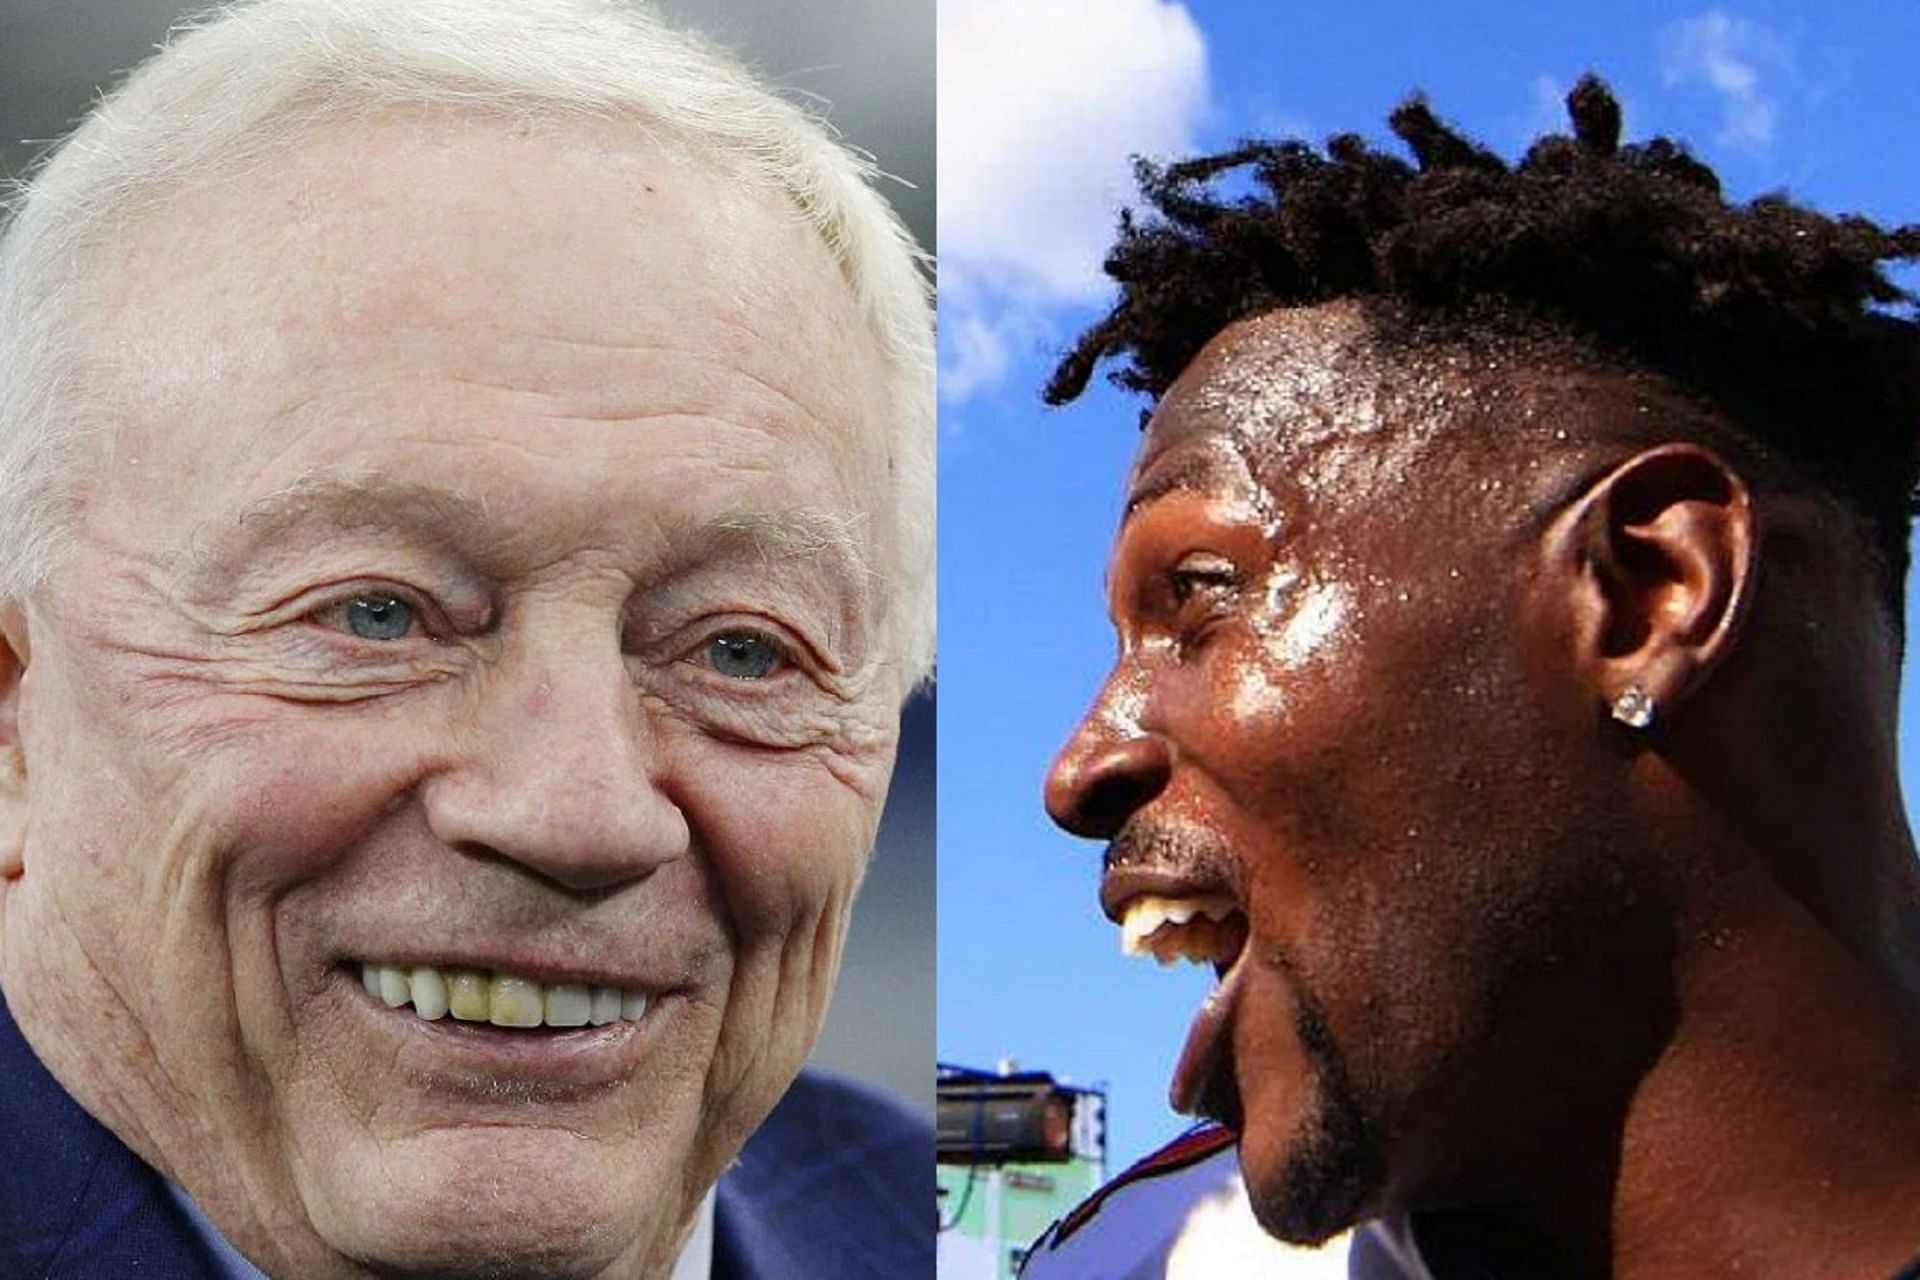 Cowboys owner and Buccaneers receiver